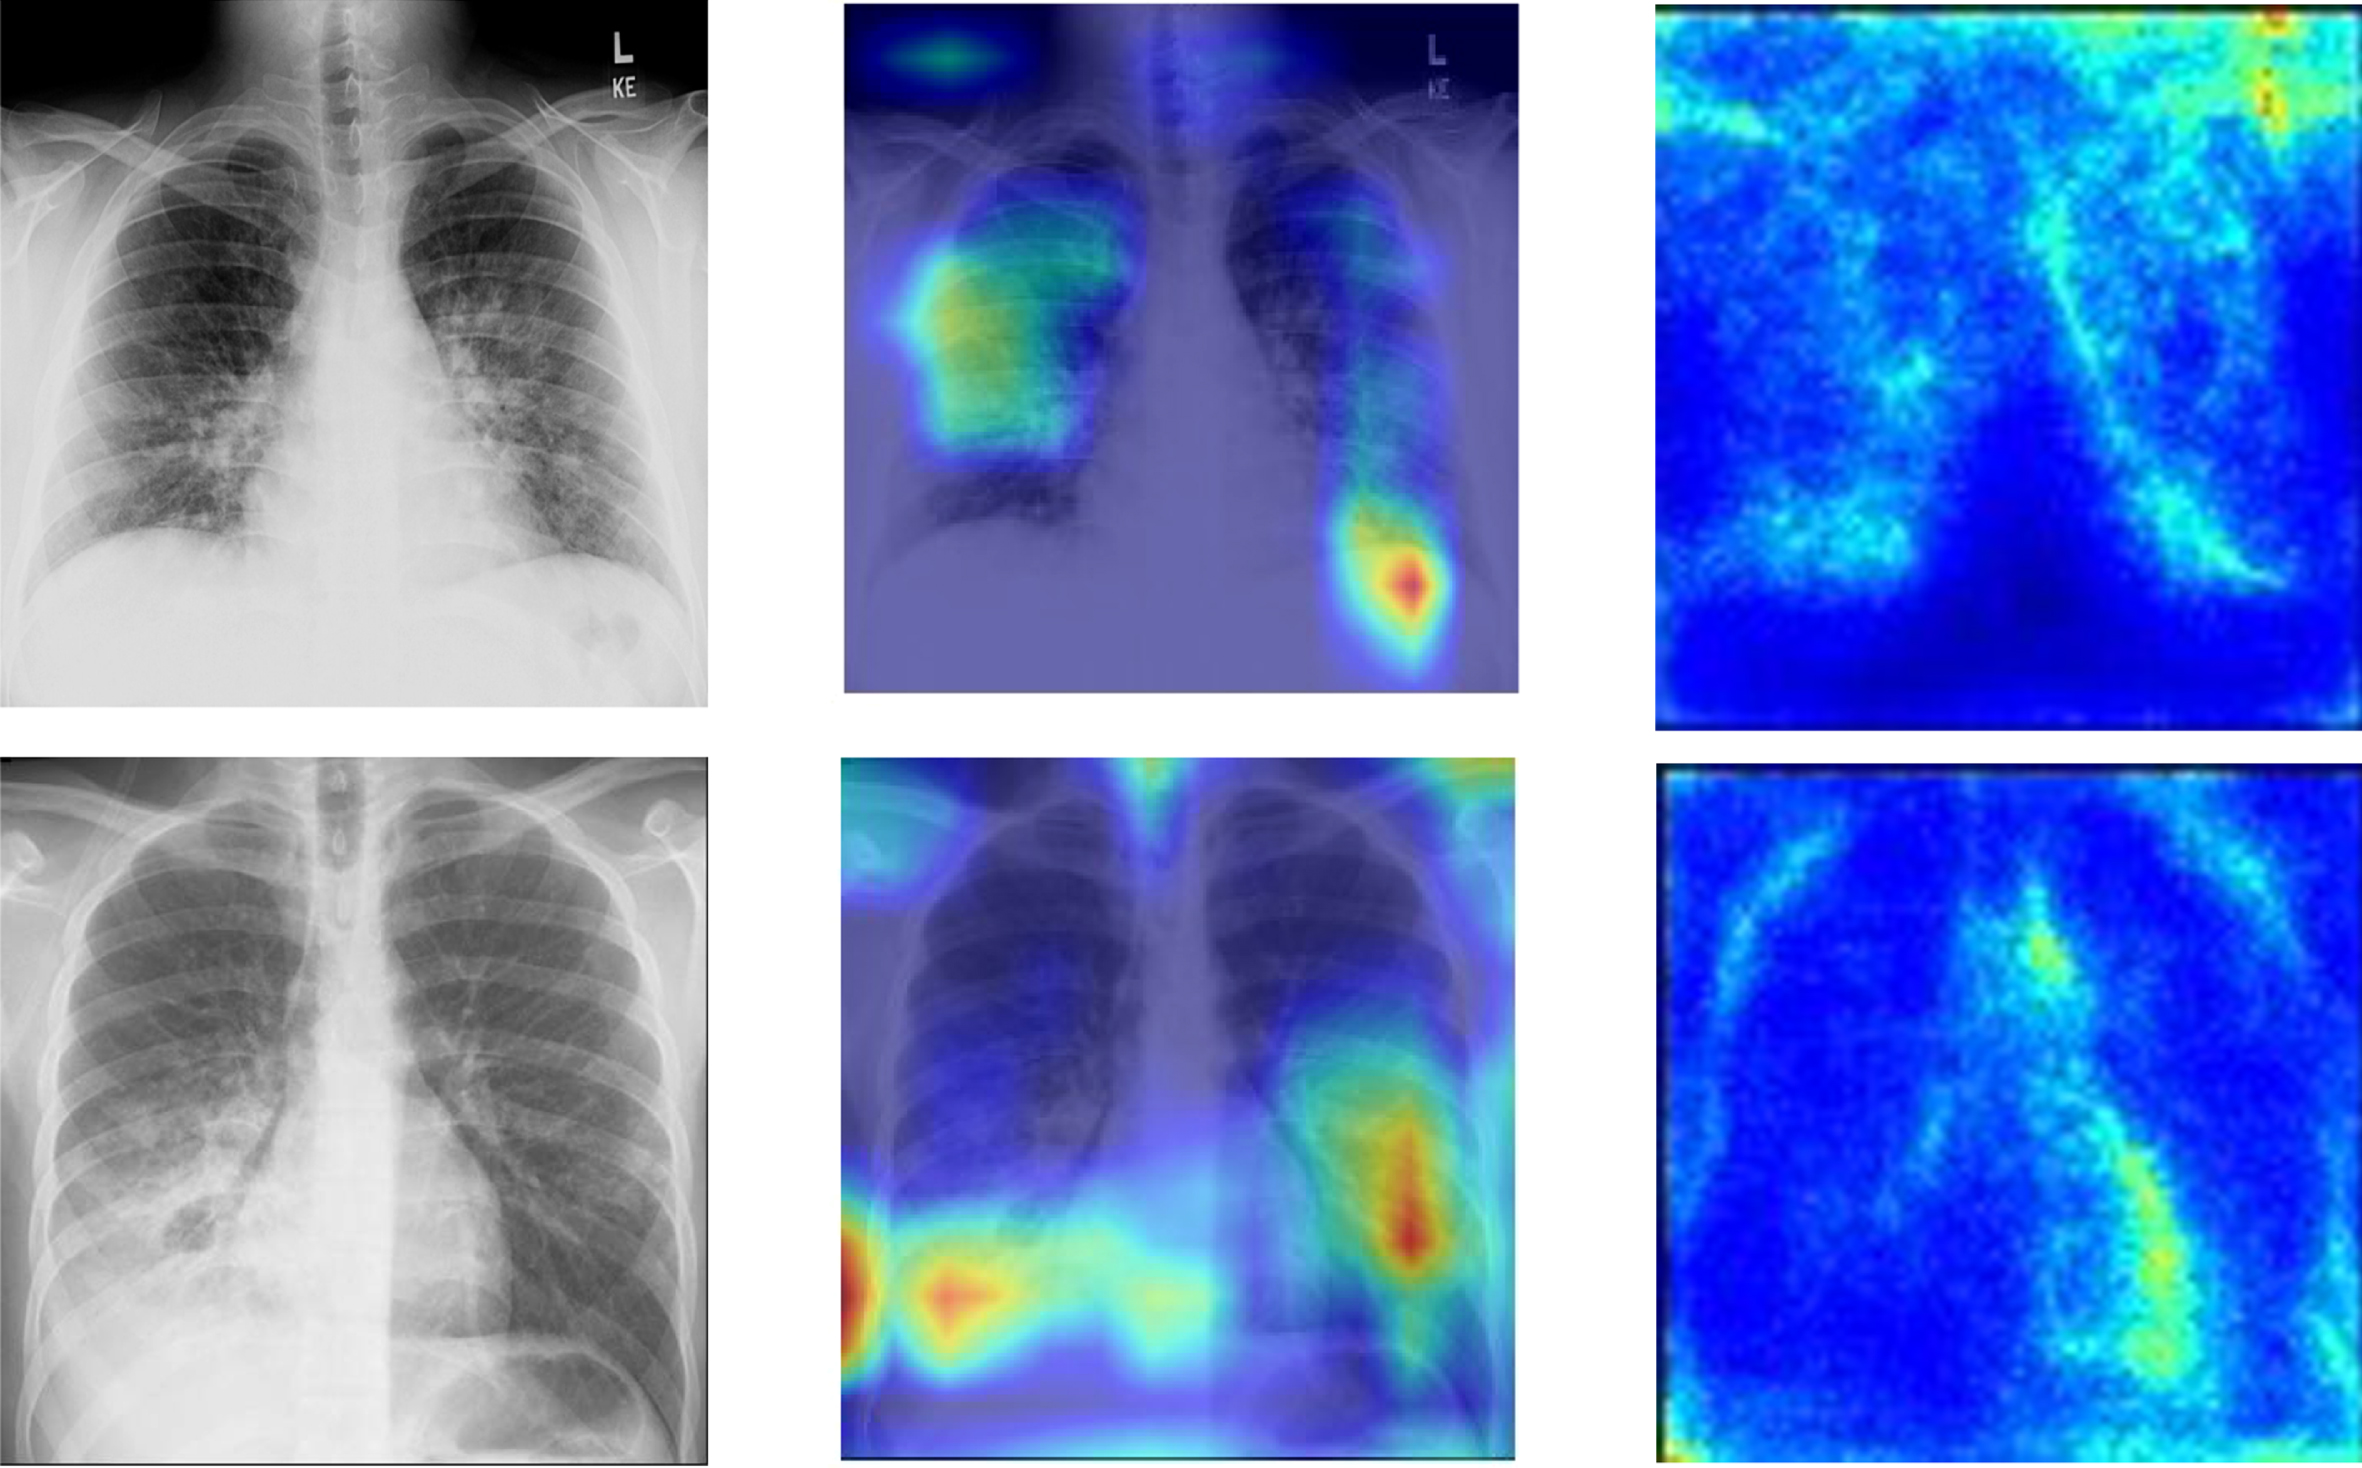 Graphical depiction of features extracted by network: Original CXR, Heat Map and Saliency Maps.